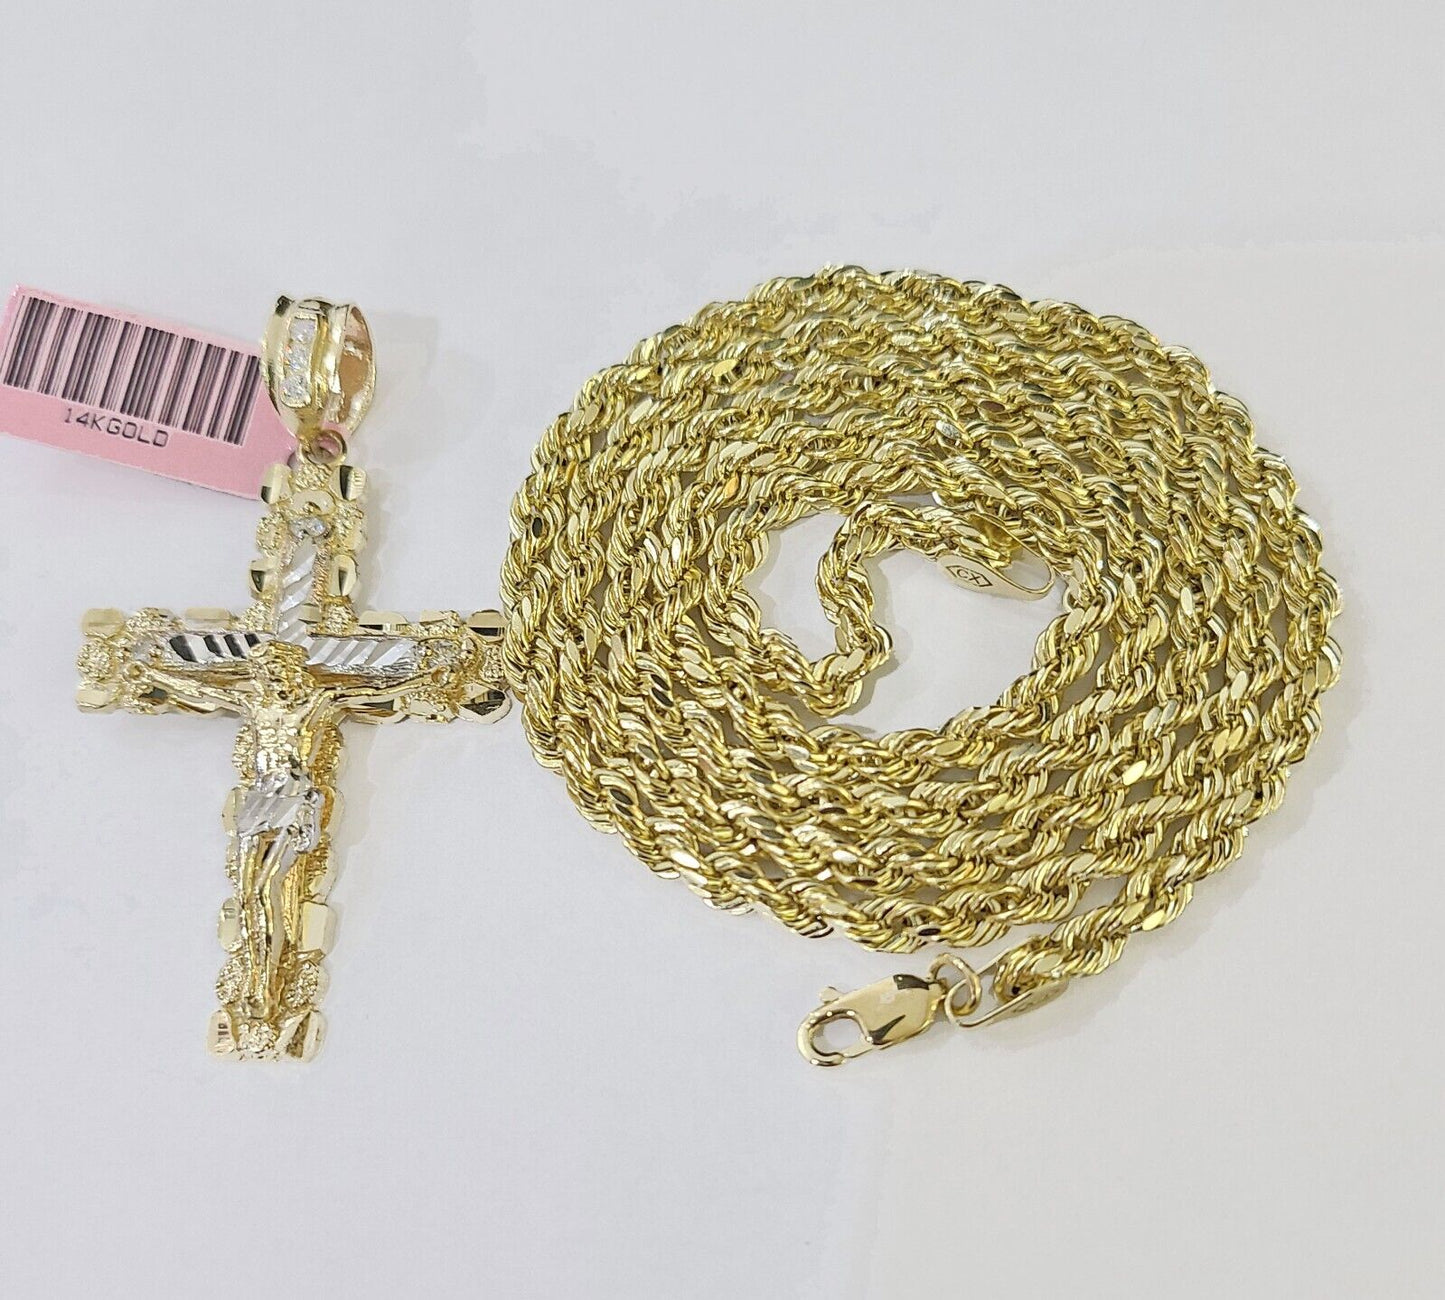 14k Yellow Gold Rope Chain & Jesus Nugget Cross Charm SET 3mm 20 Inches Necklace